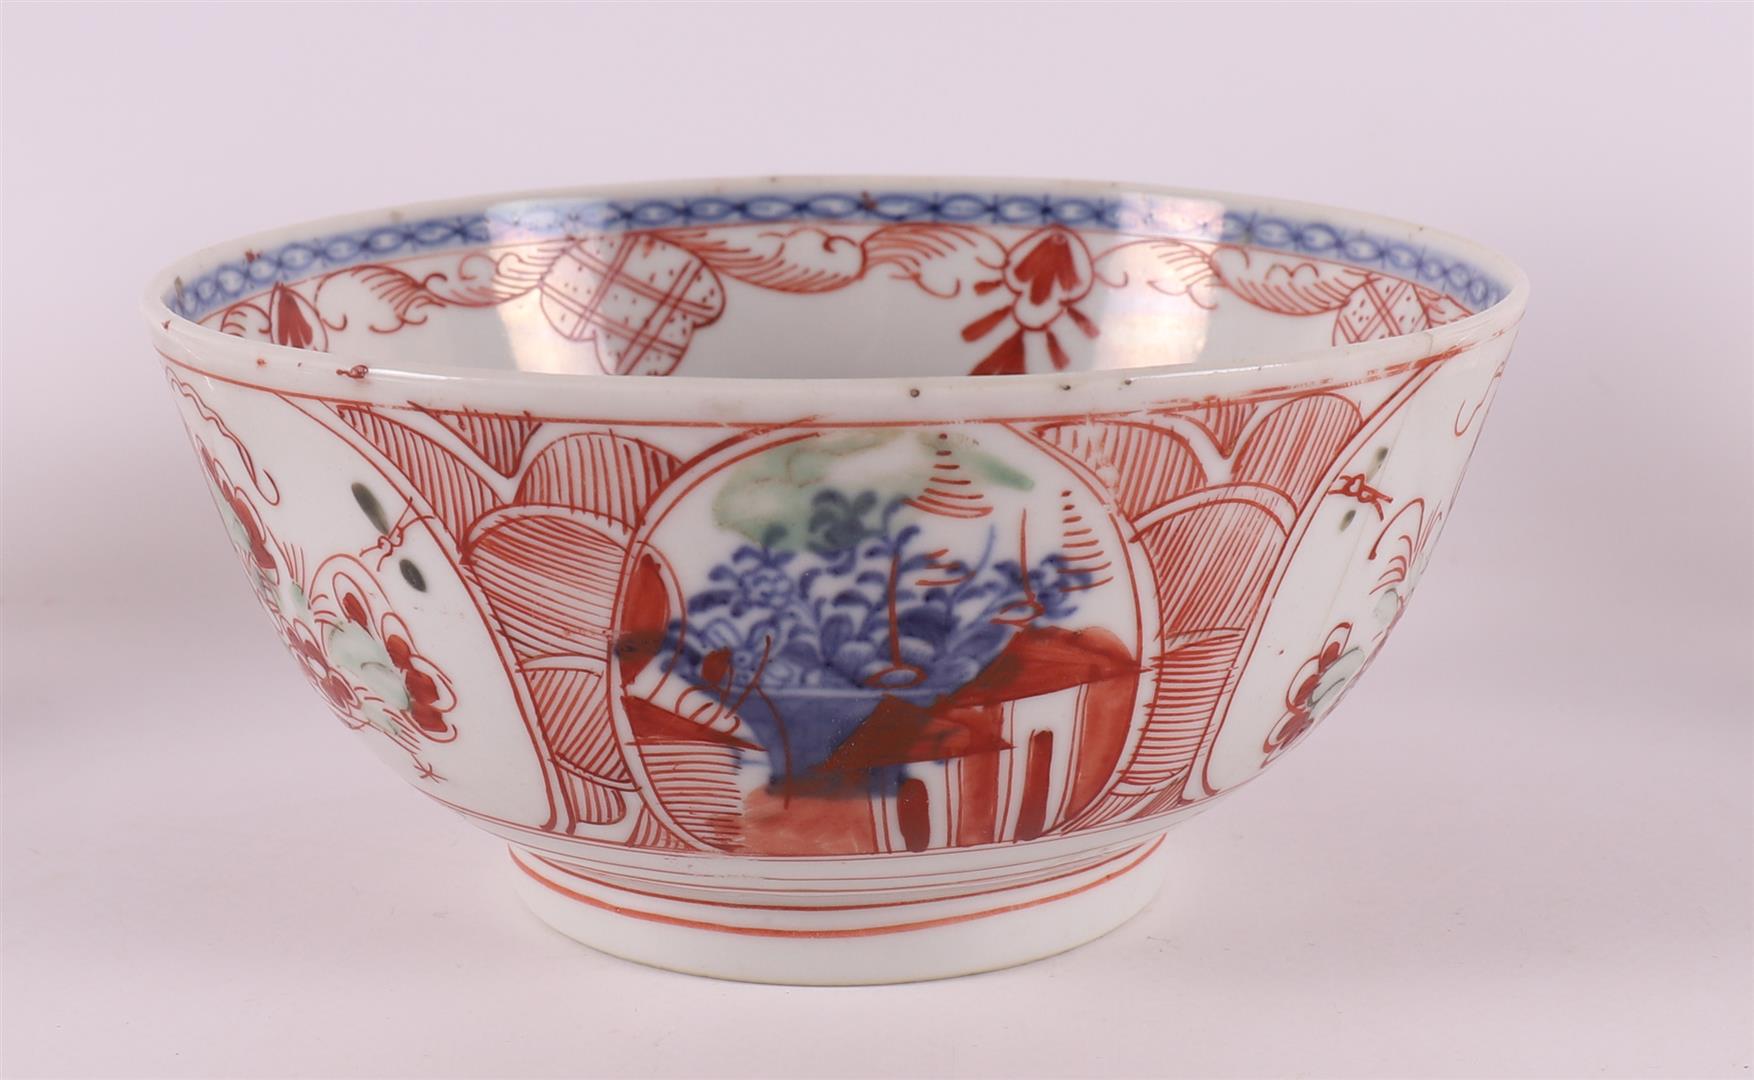 An Amsterdam colorful porcelain bowl, China, Qianglong, 18th century. Polychrome decoration of - Image 3 of 20